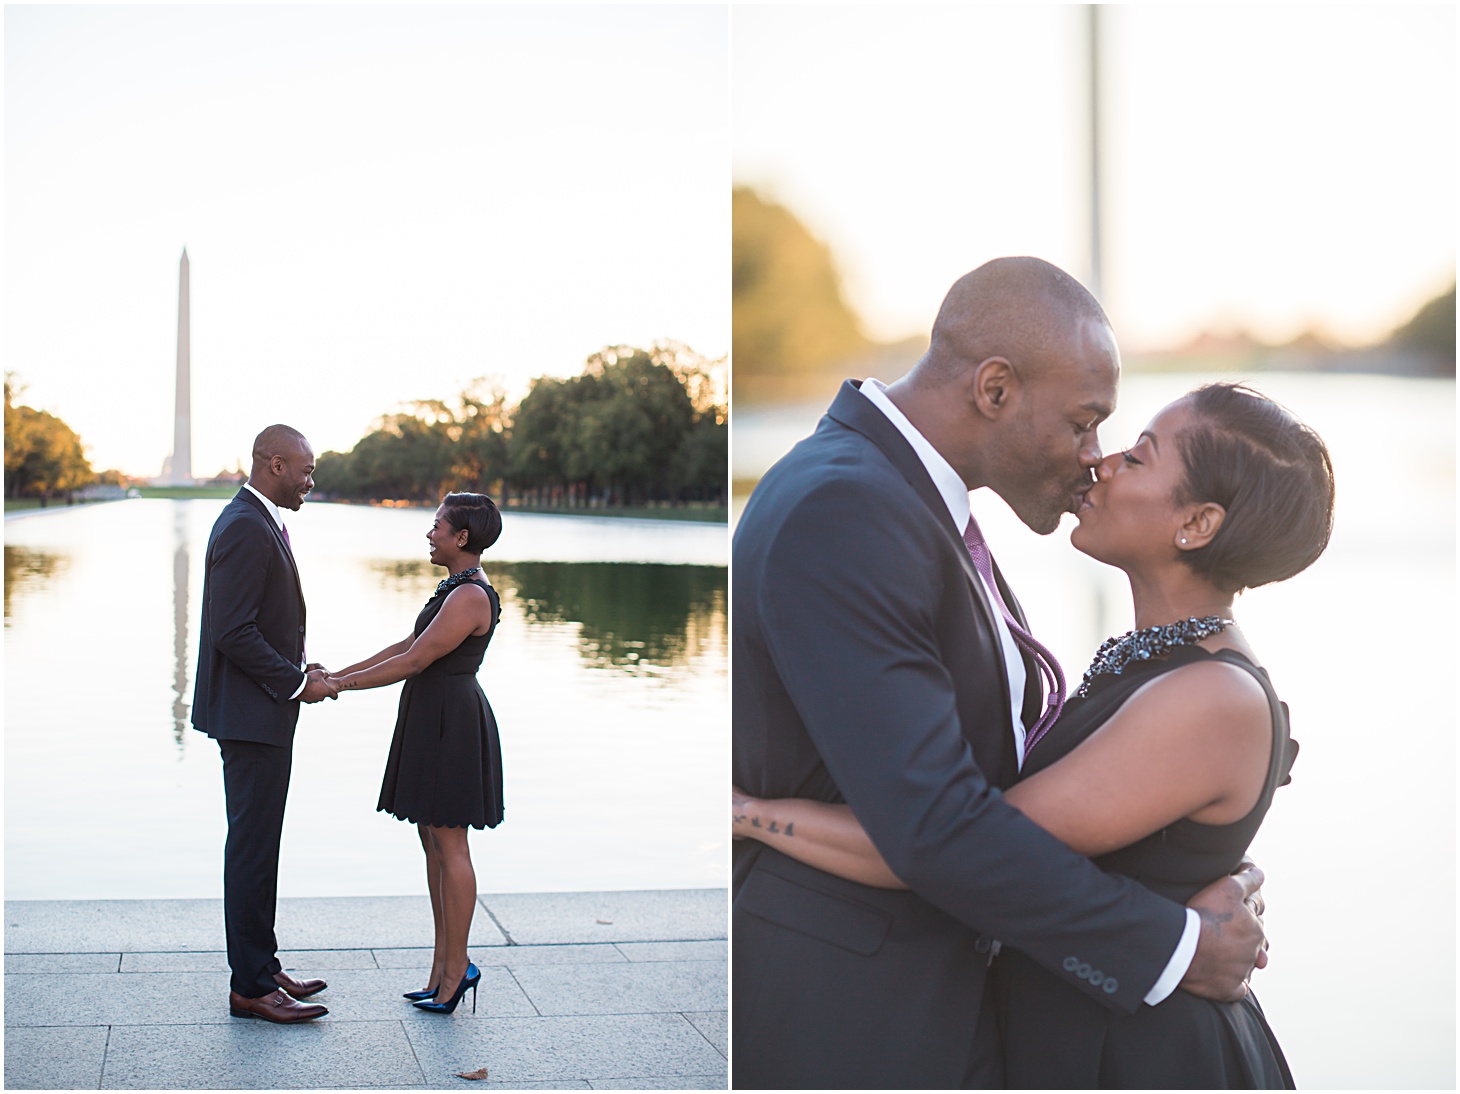 Sun-drenched Autumn Engagement session at Lincoln Memorial | Portrait by Sarah Bradshaw Photography